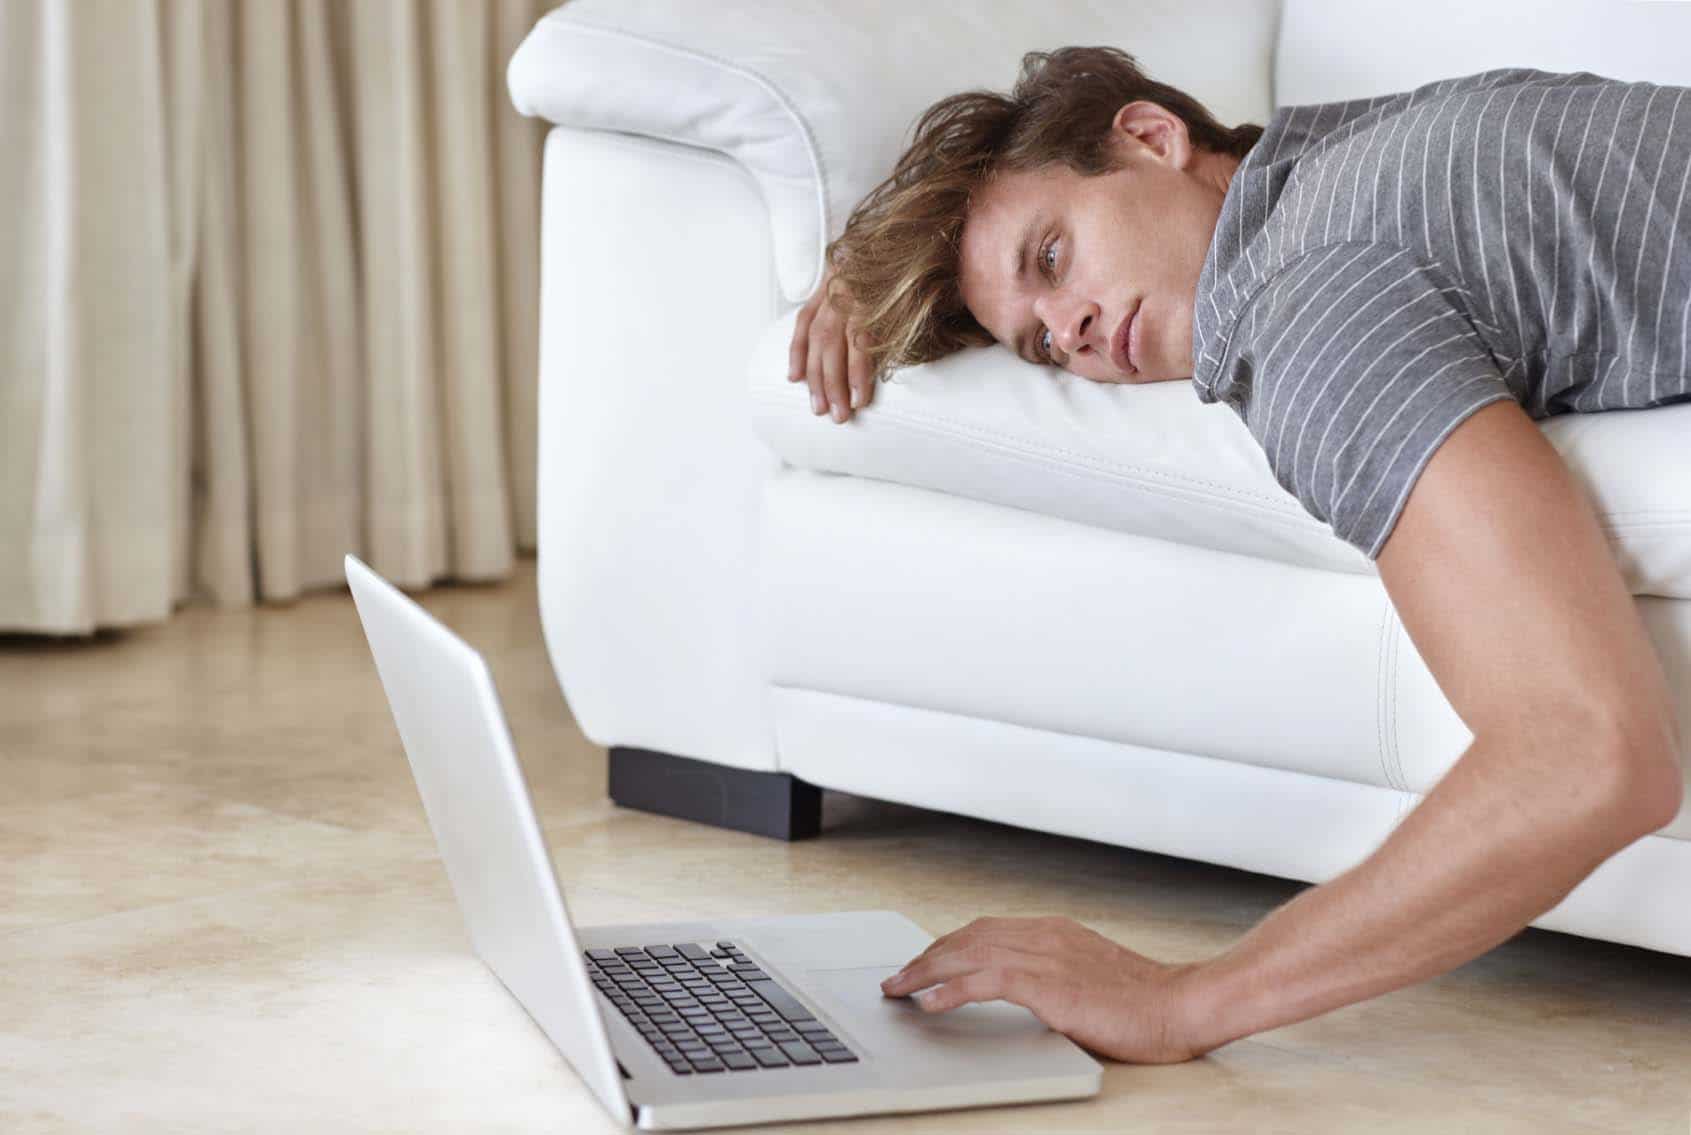 A young man lying on his couch with his hand resting on his laptop's keyboard